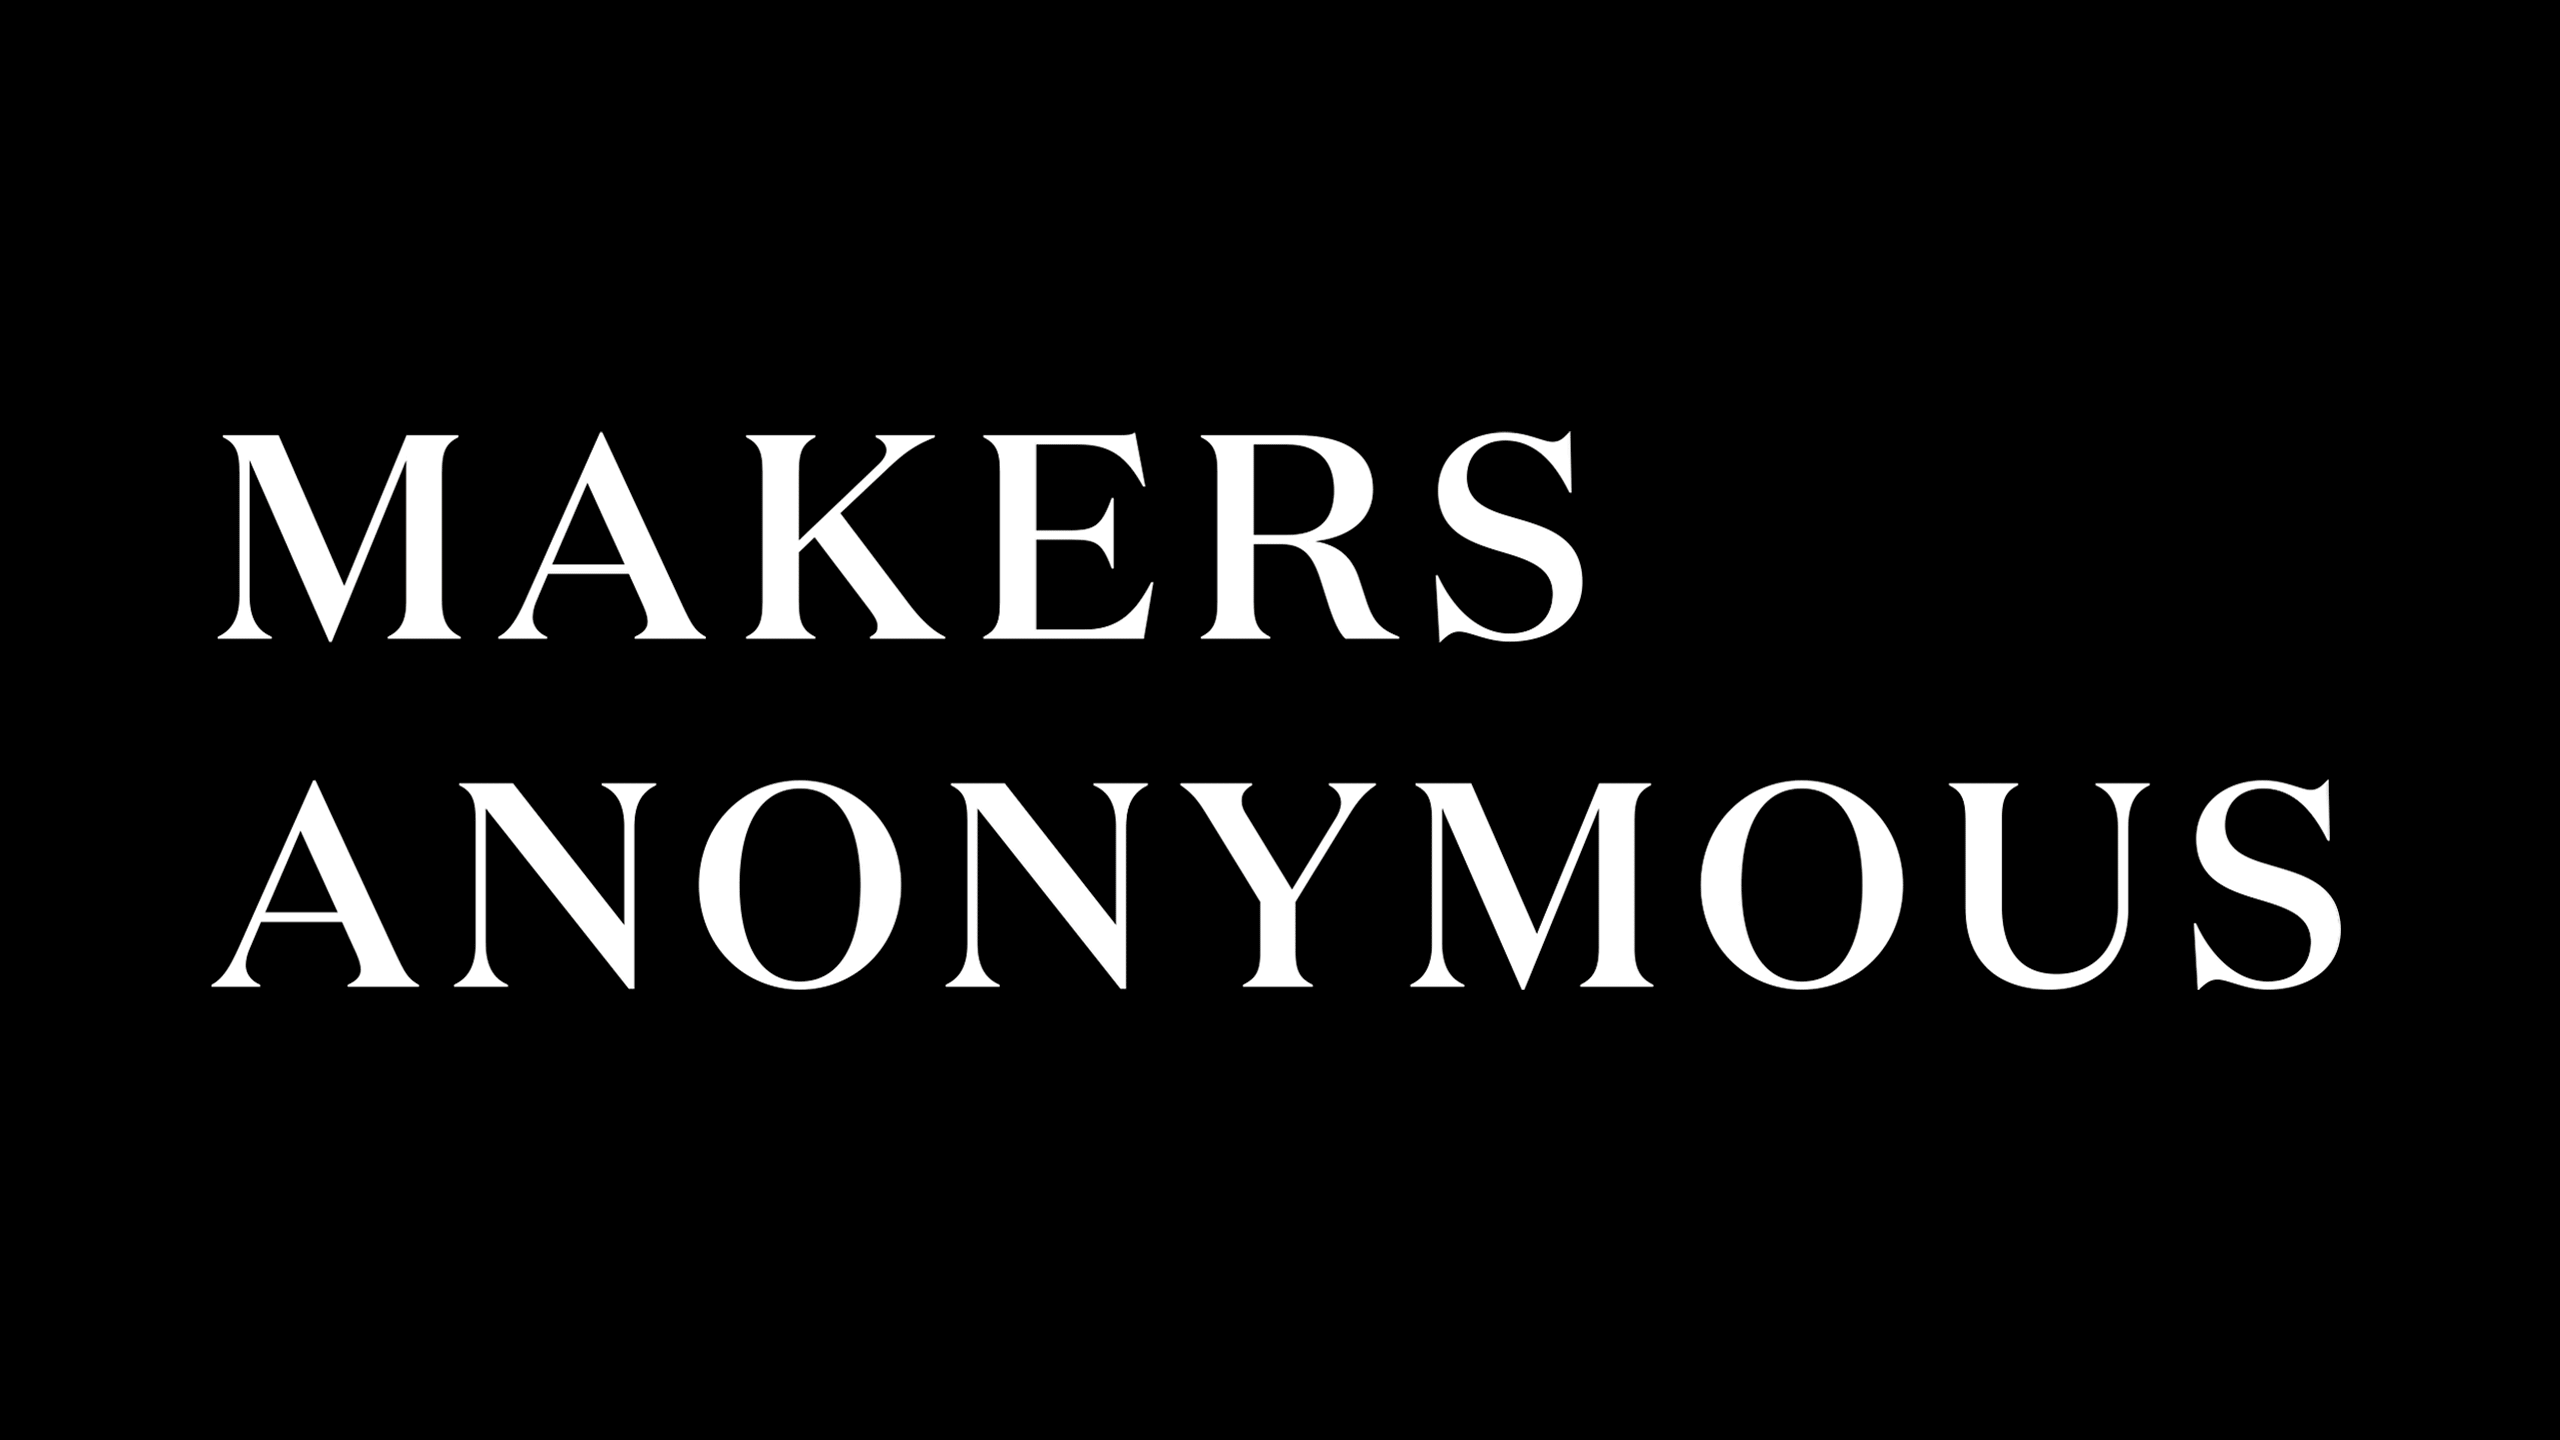 Tried-and-True-Design-Auckland-Makers-Anonymous-madebyus